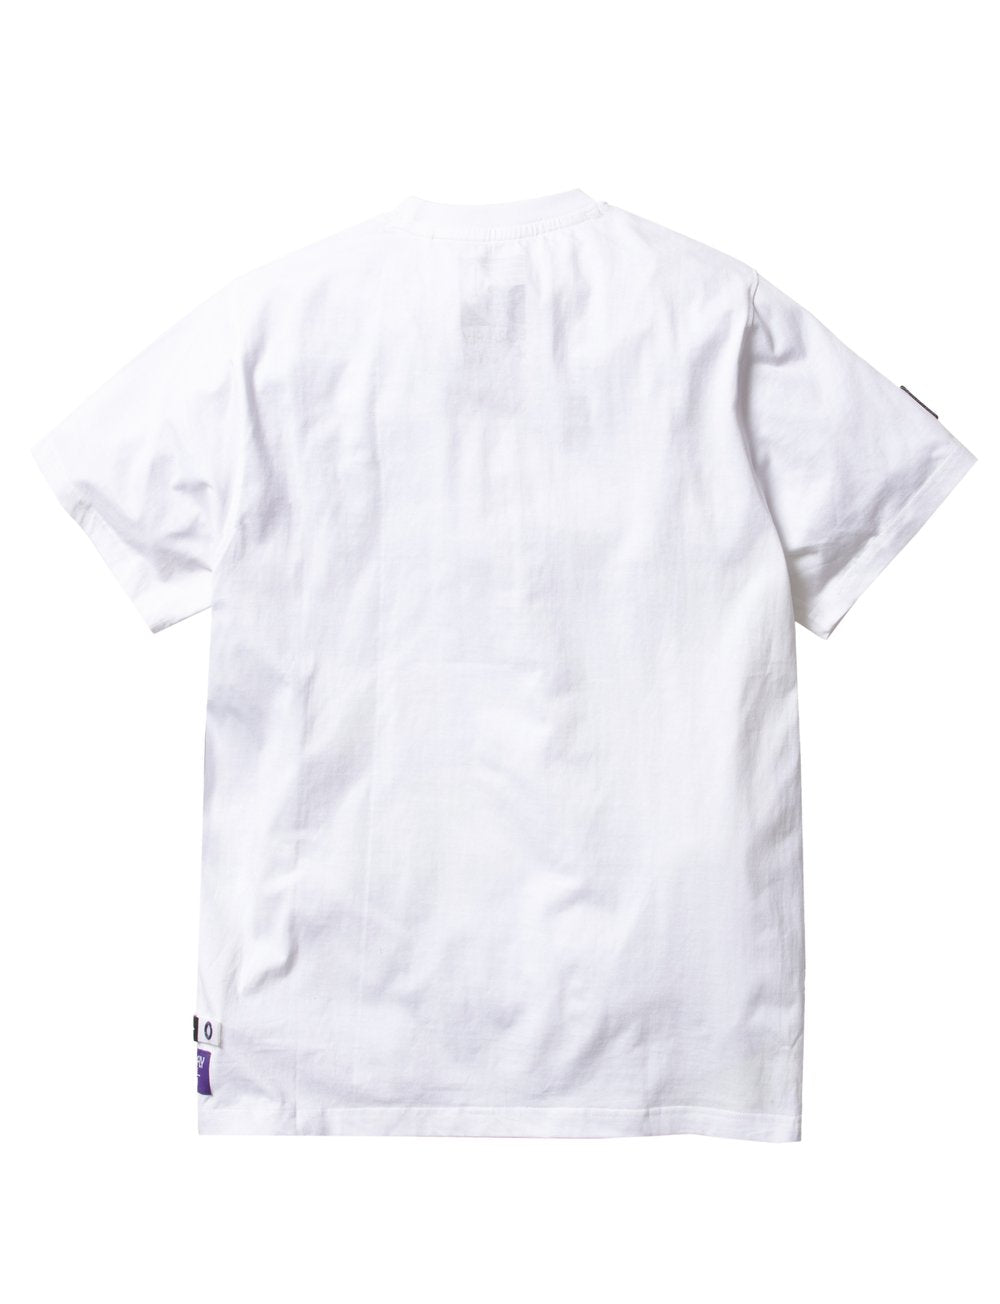 Born Fly-Venice Graphic Tee-White